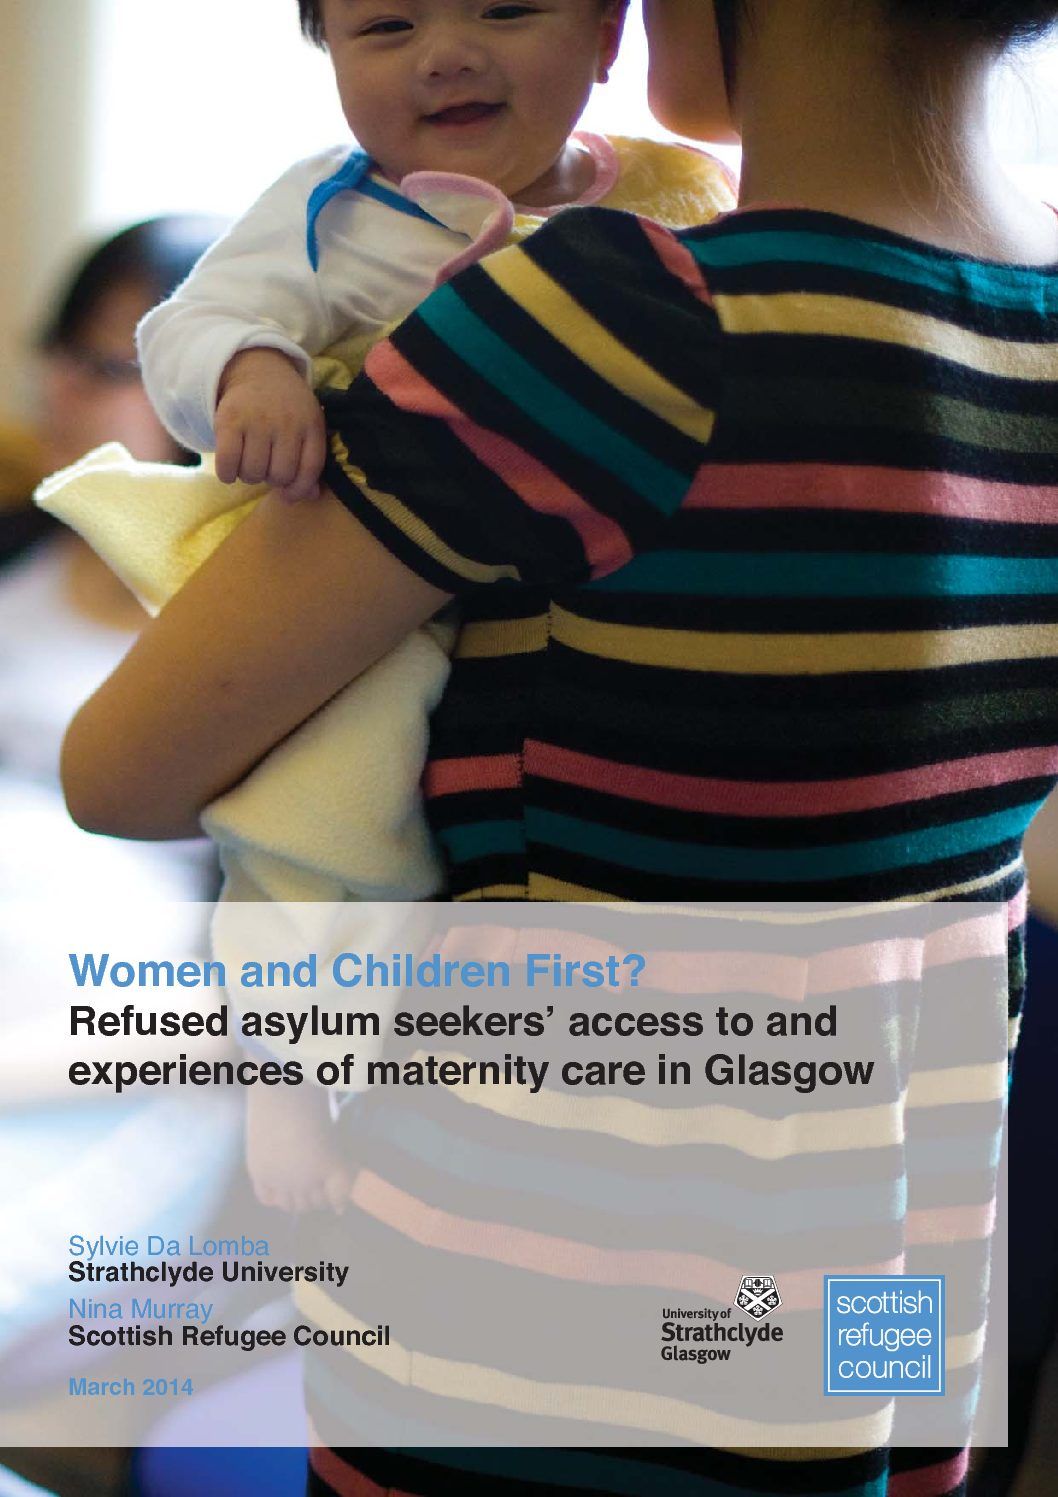 Women-and-Children-First-Refused-asylum-seekers’-access-to-and-experiences-of-maternity-care-in-Glasgow-Full-Report-pdf